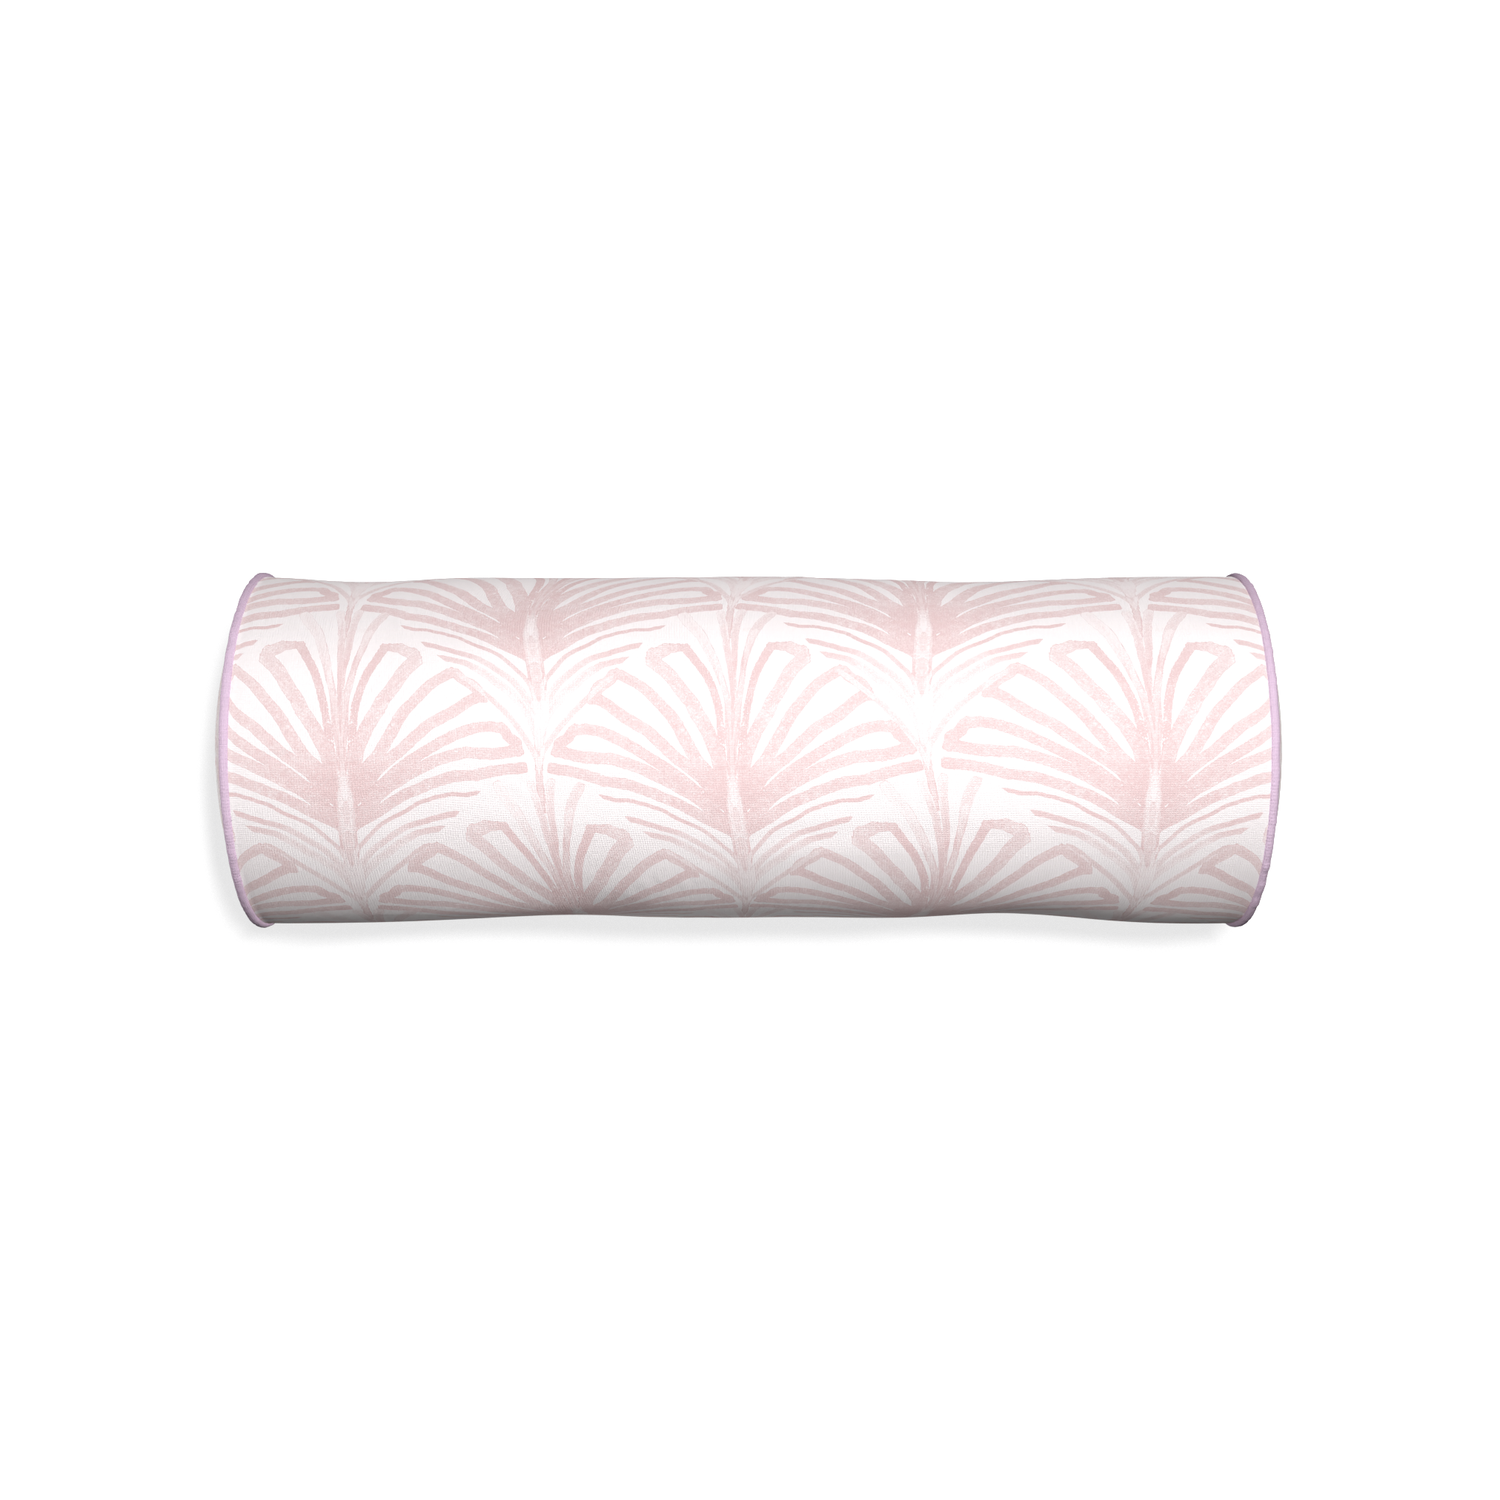 Bolster suzy rose custom rose pink palmpillow with l piping on white background